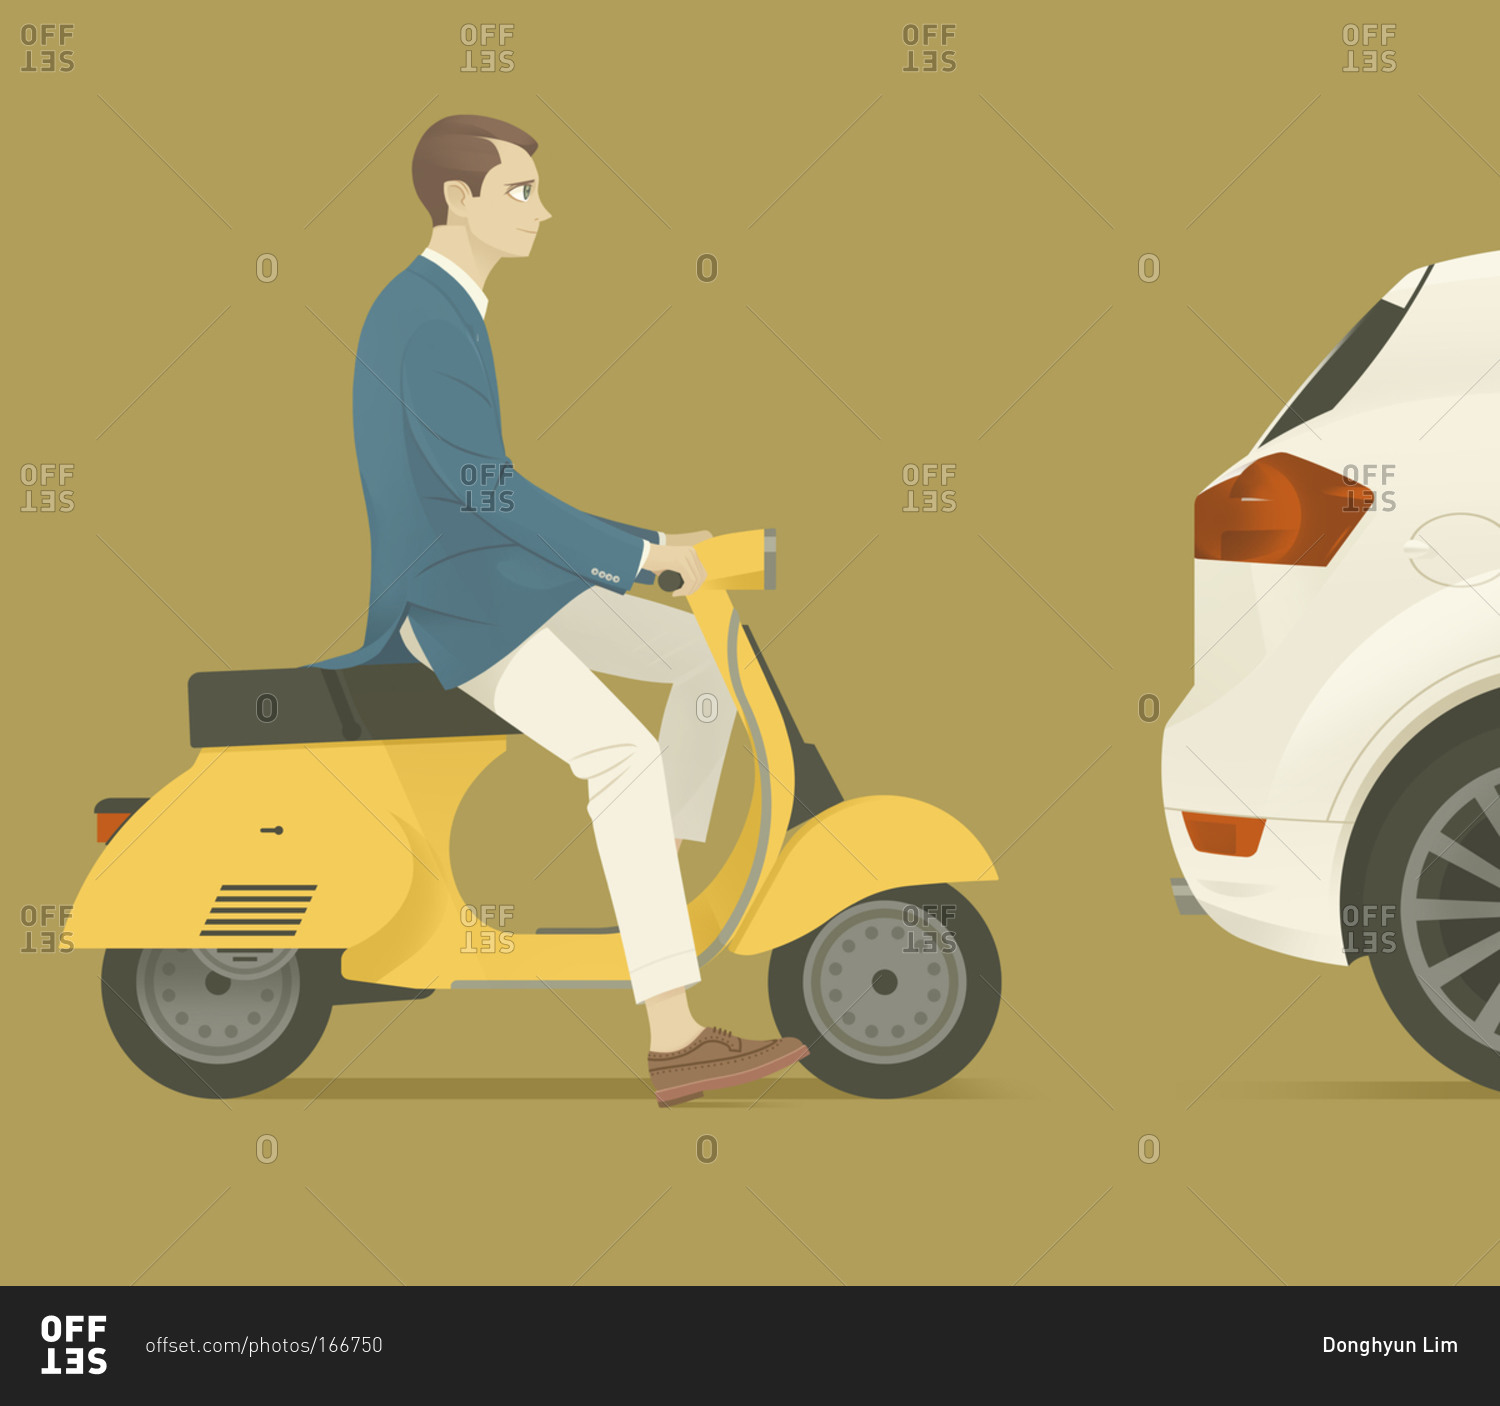 Man sitting on scooter behind a car